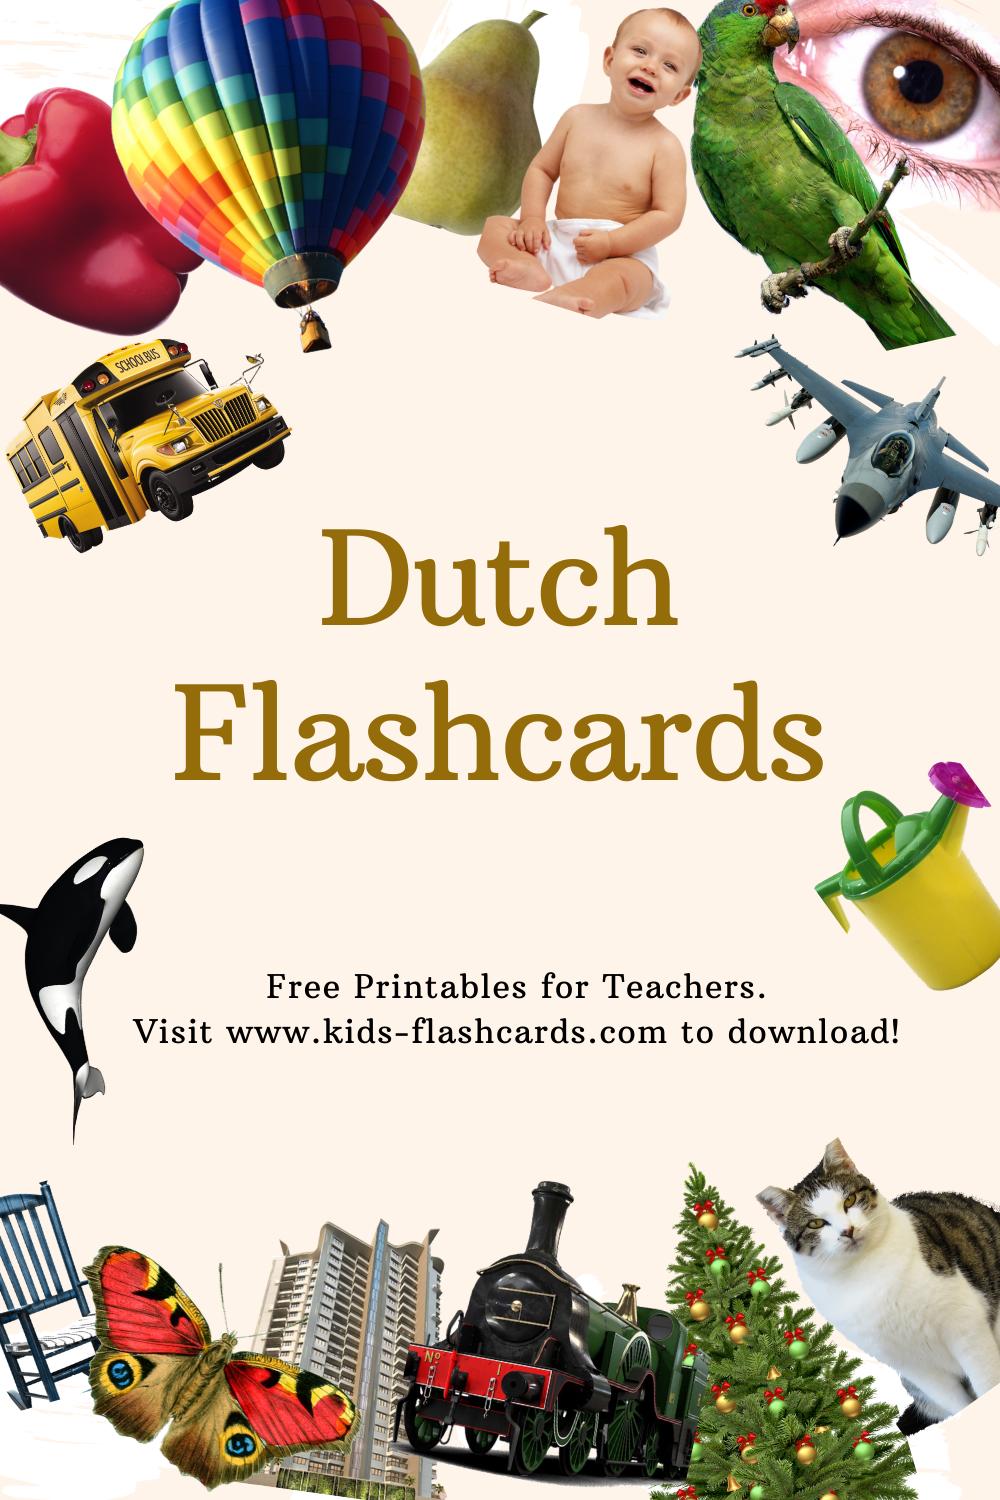 Worksheets to learn Dutch language